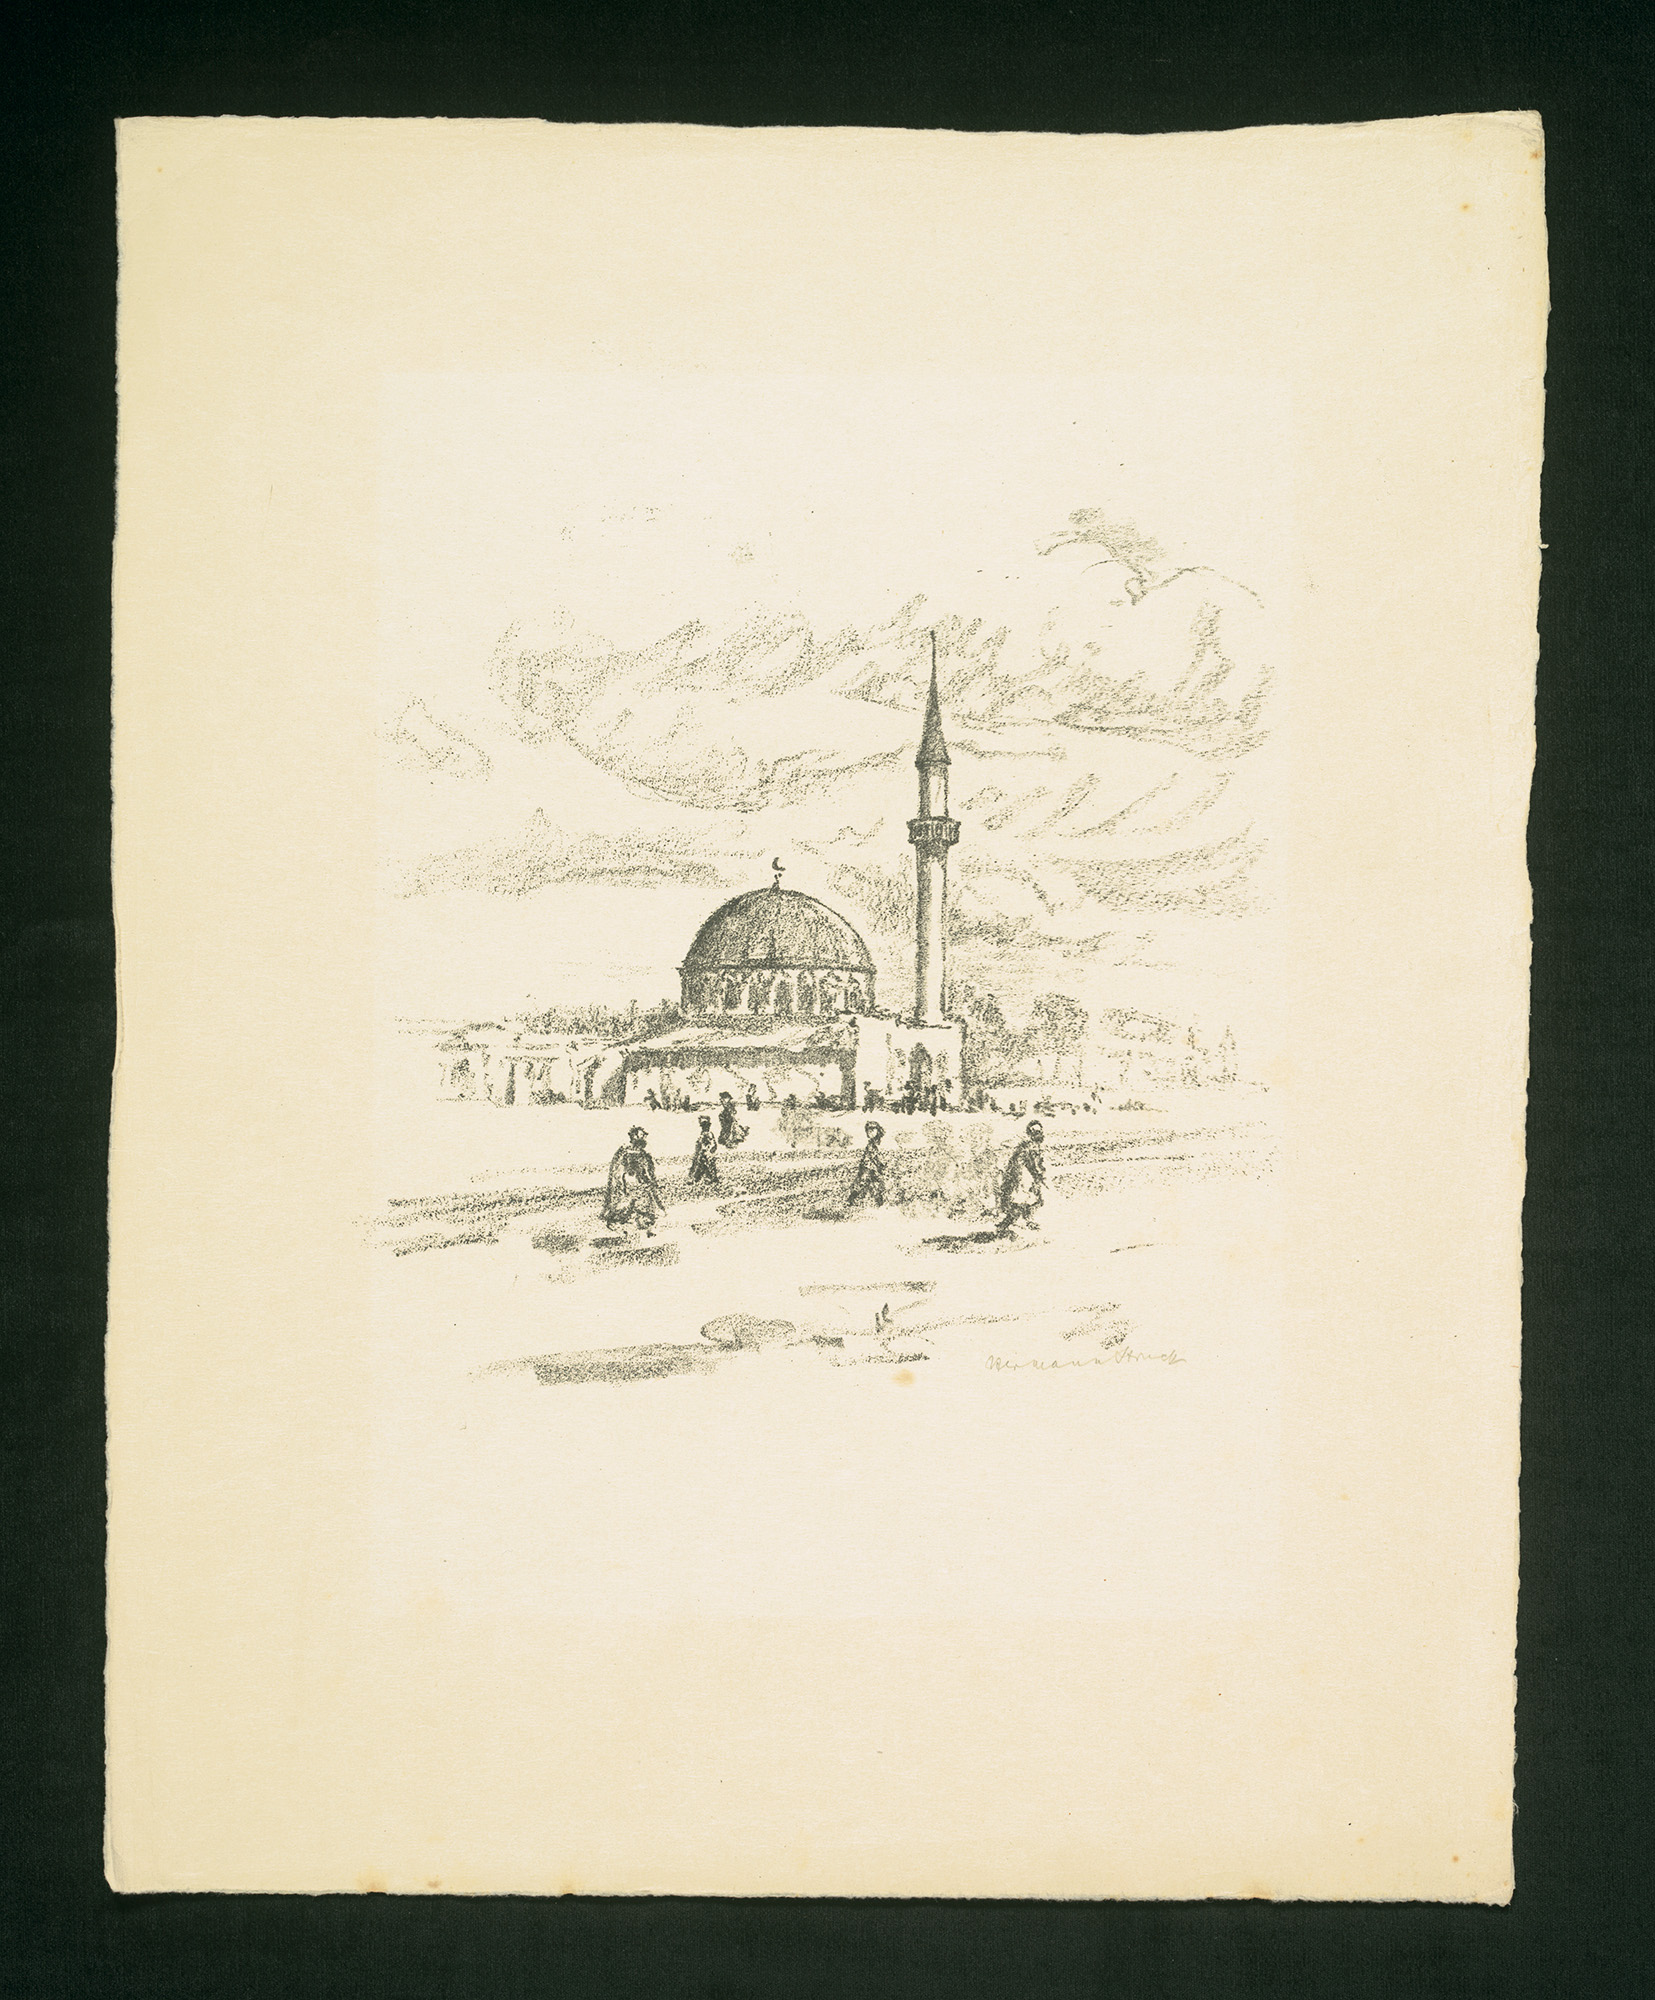 Scan of a pencil sketch of a mosque with sketched human figures walking around it